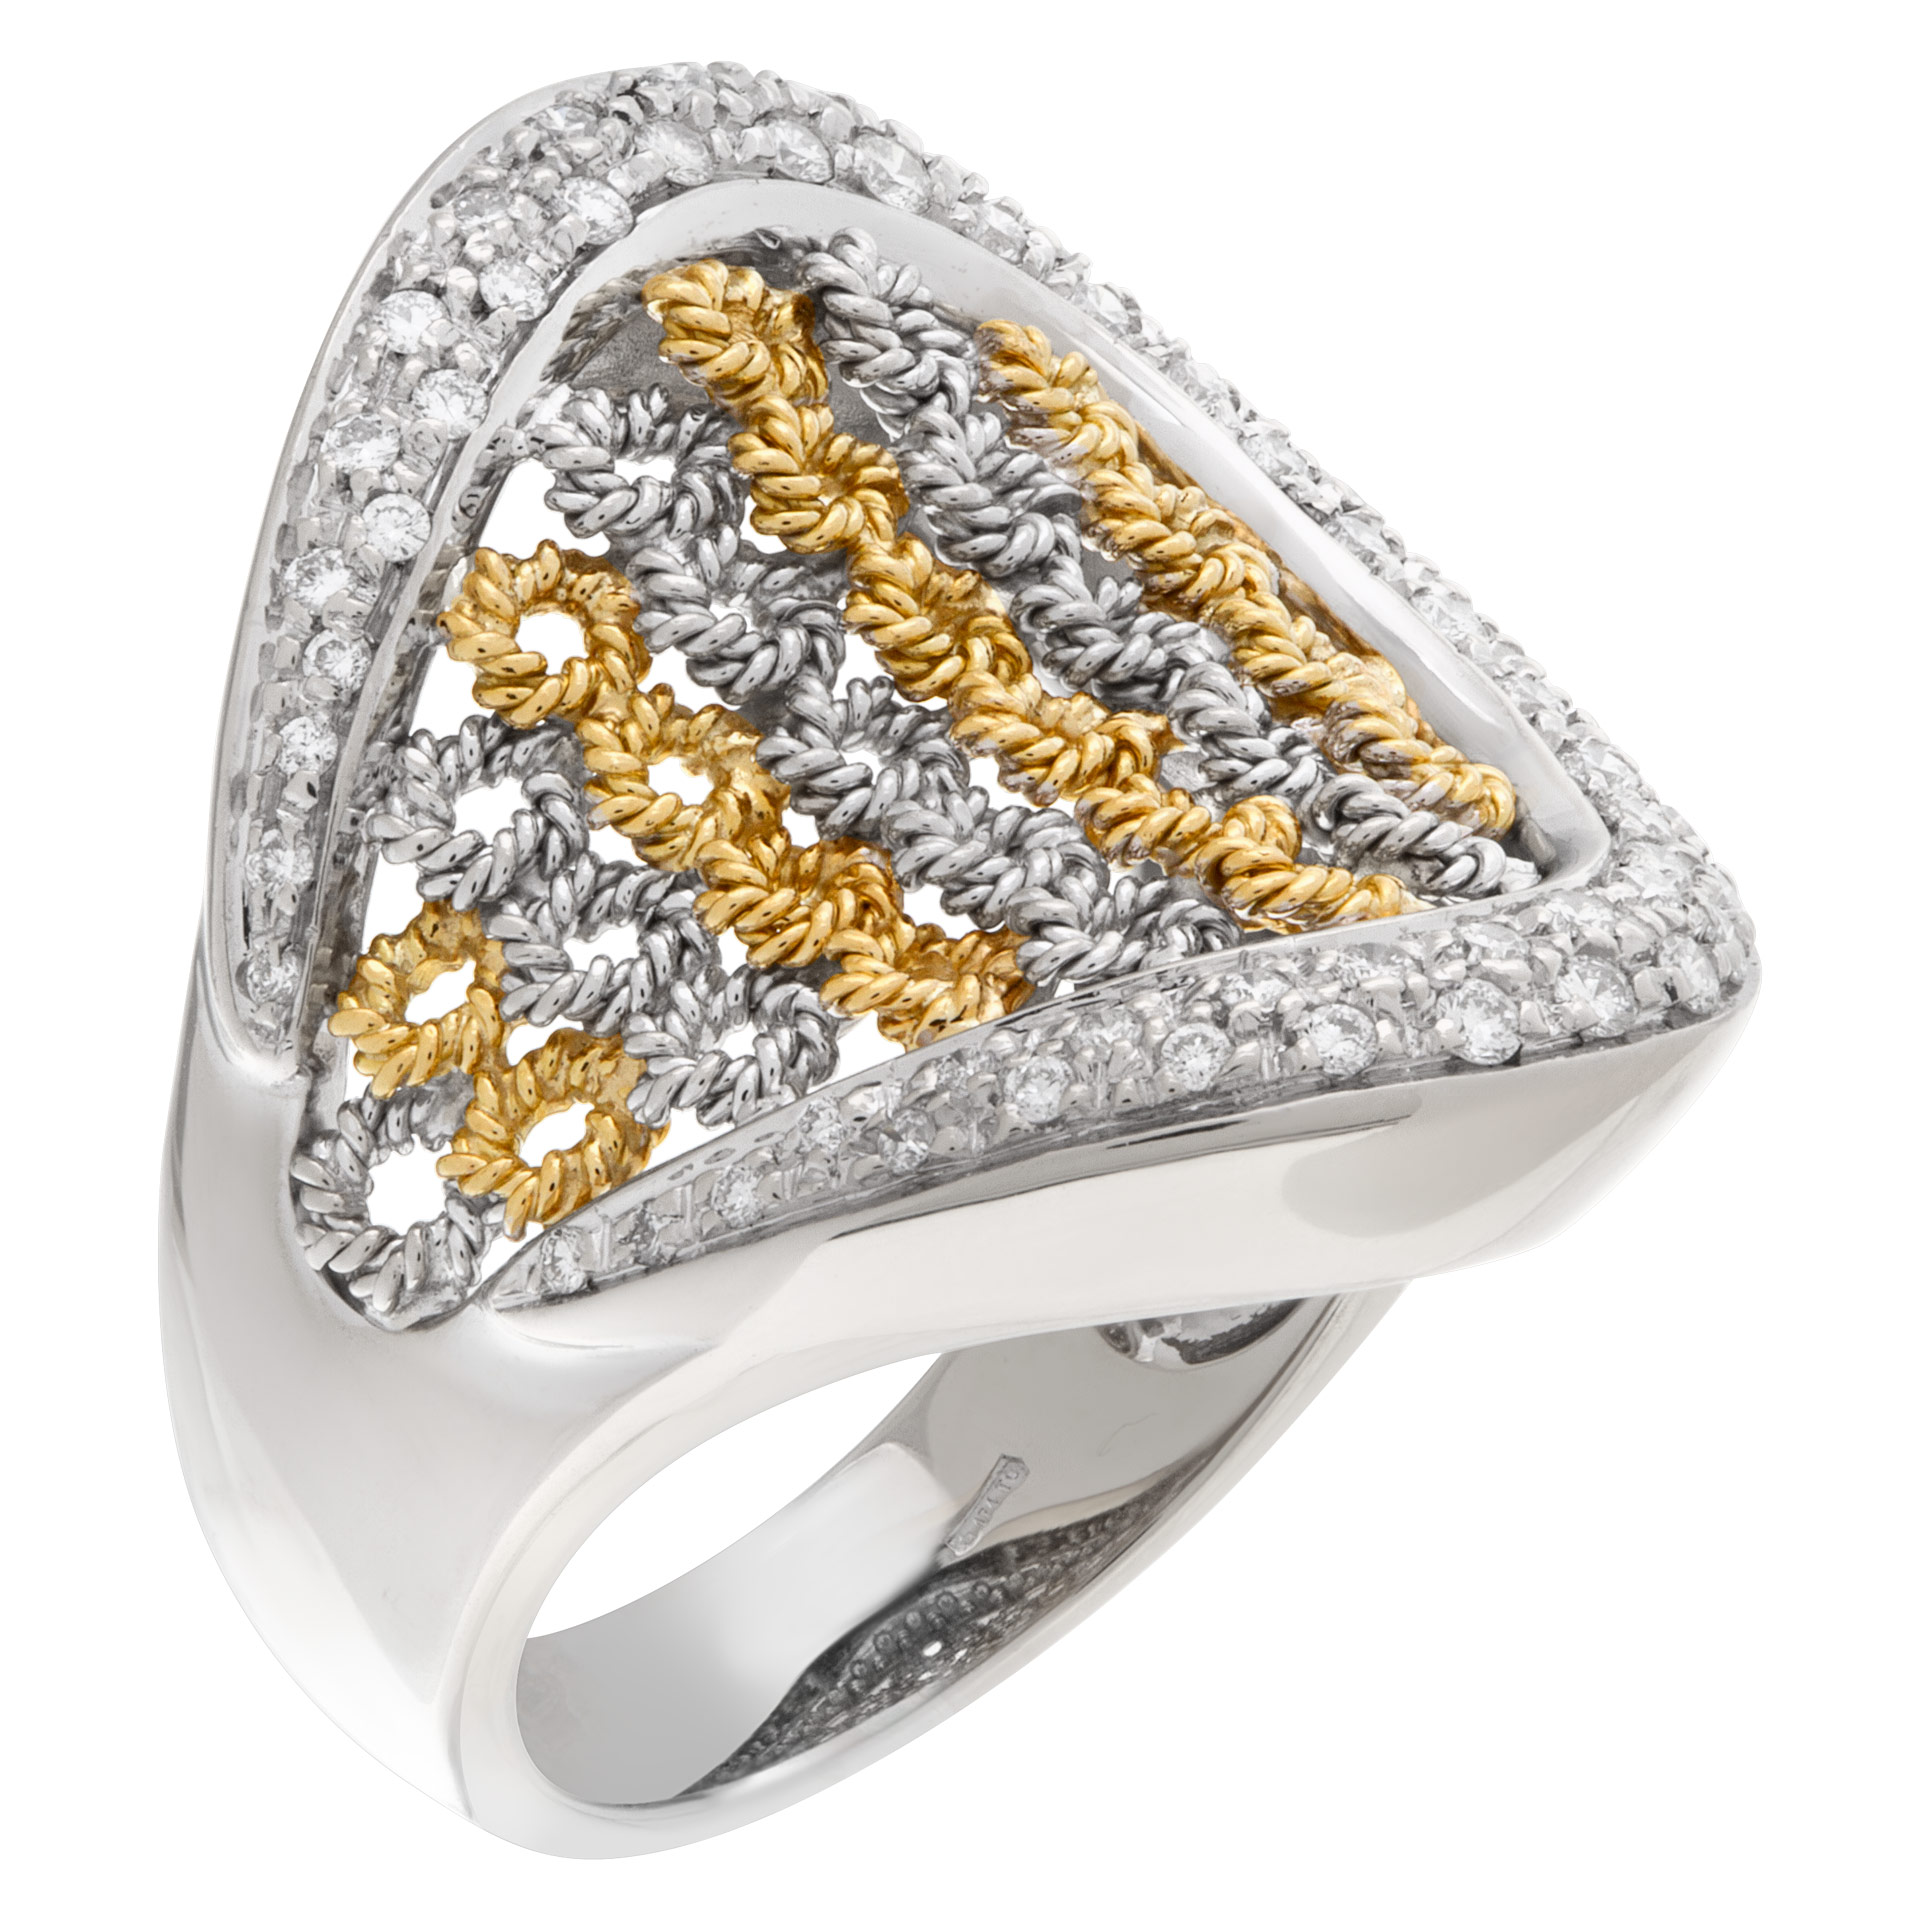 Basket weave with surrounding pave diamonds in 18k white and yellow gold image 2